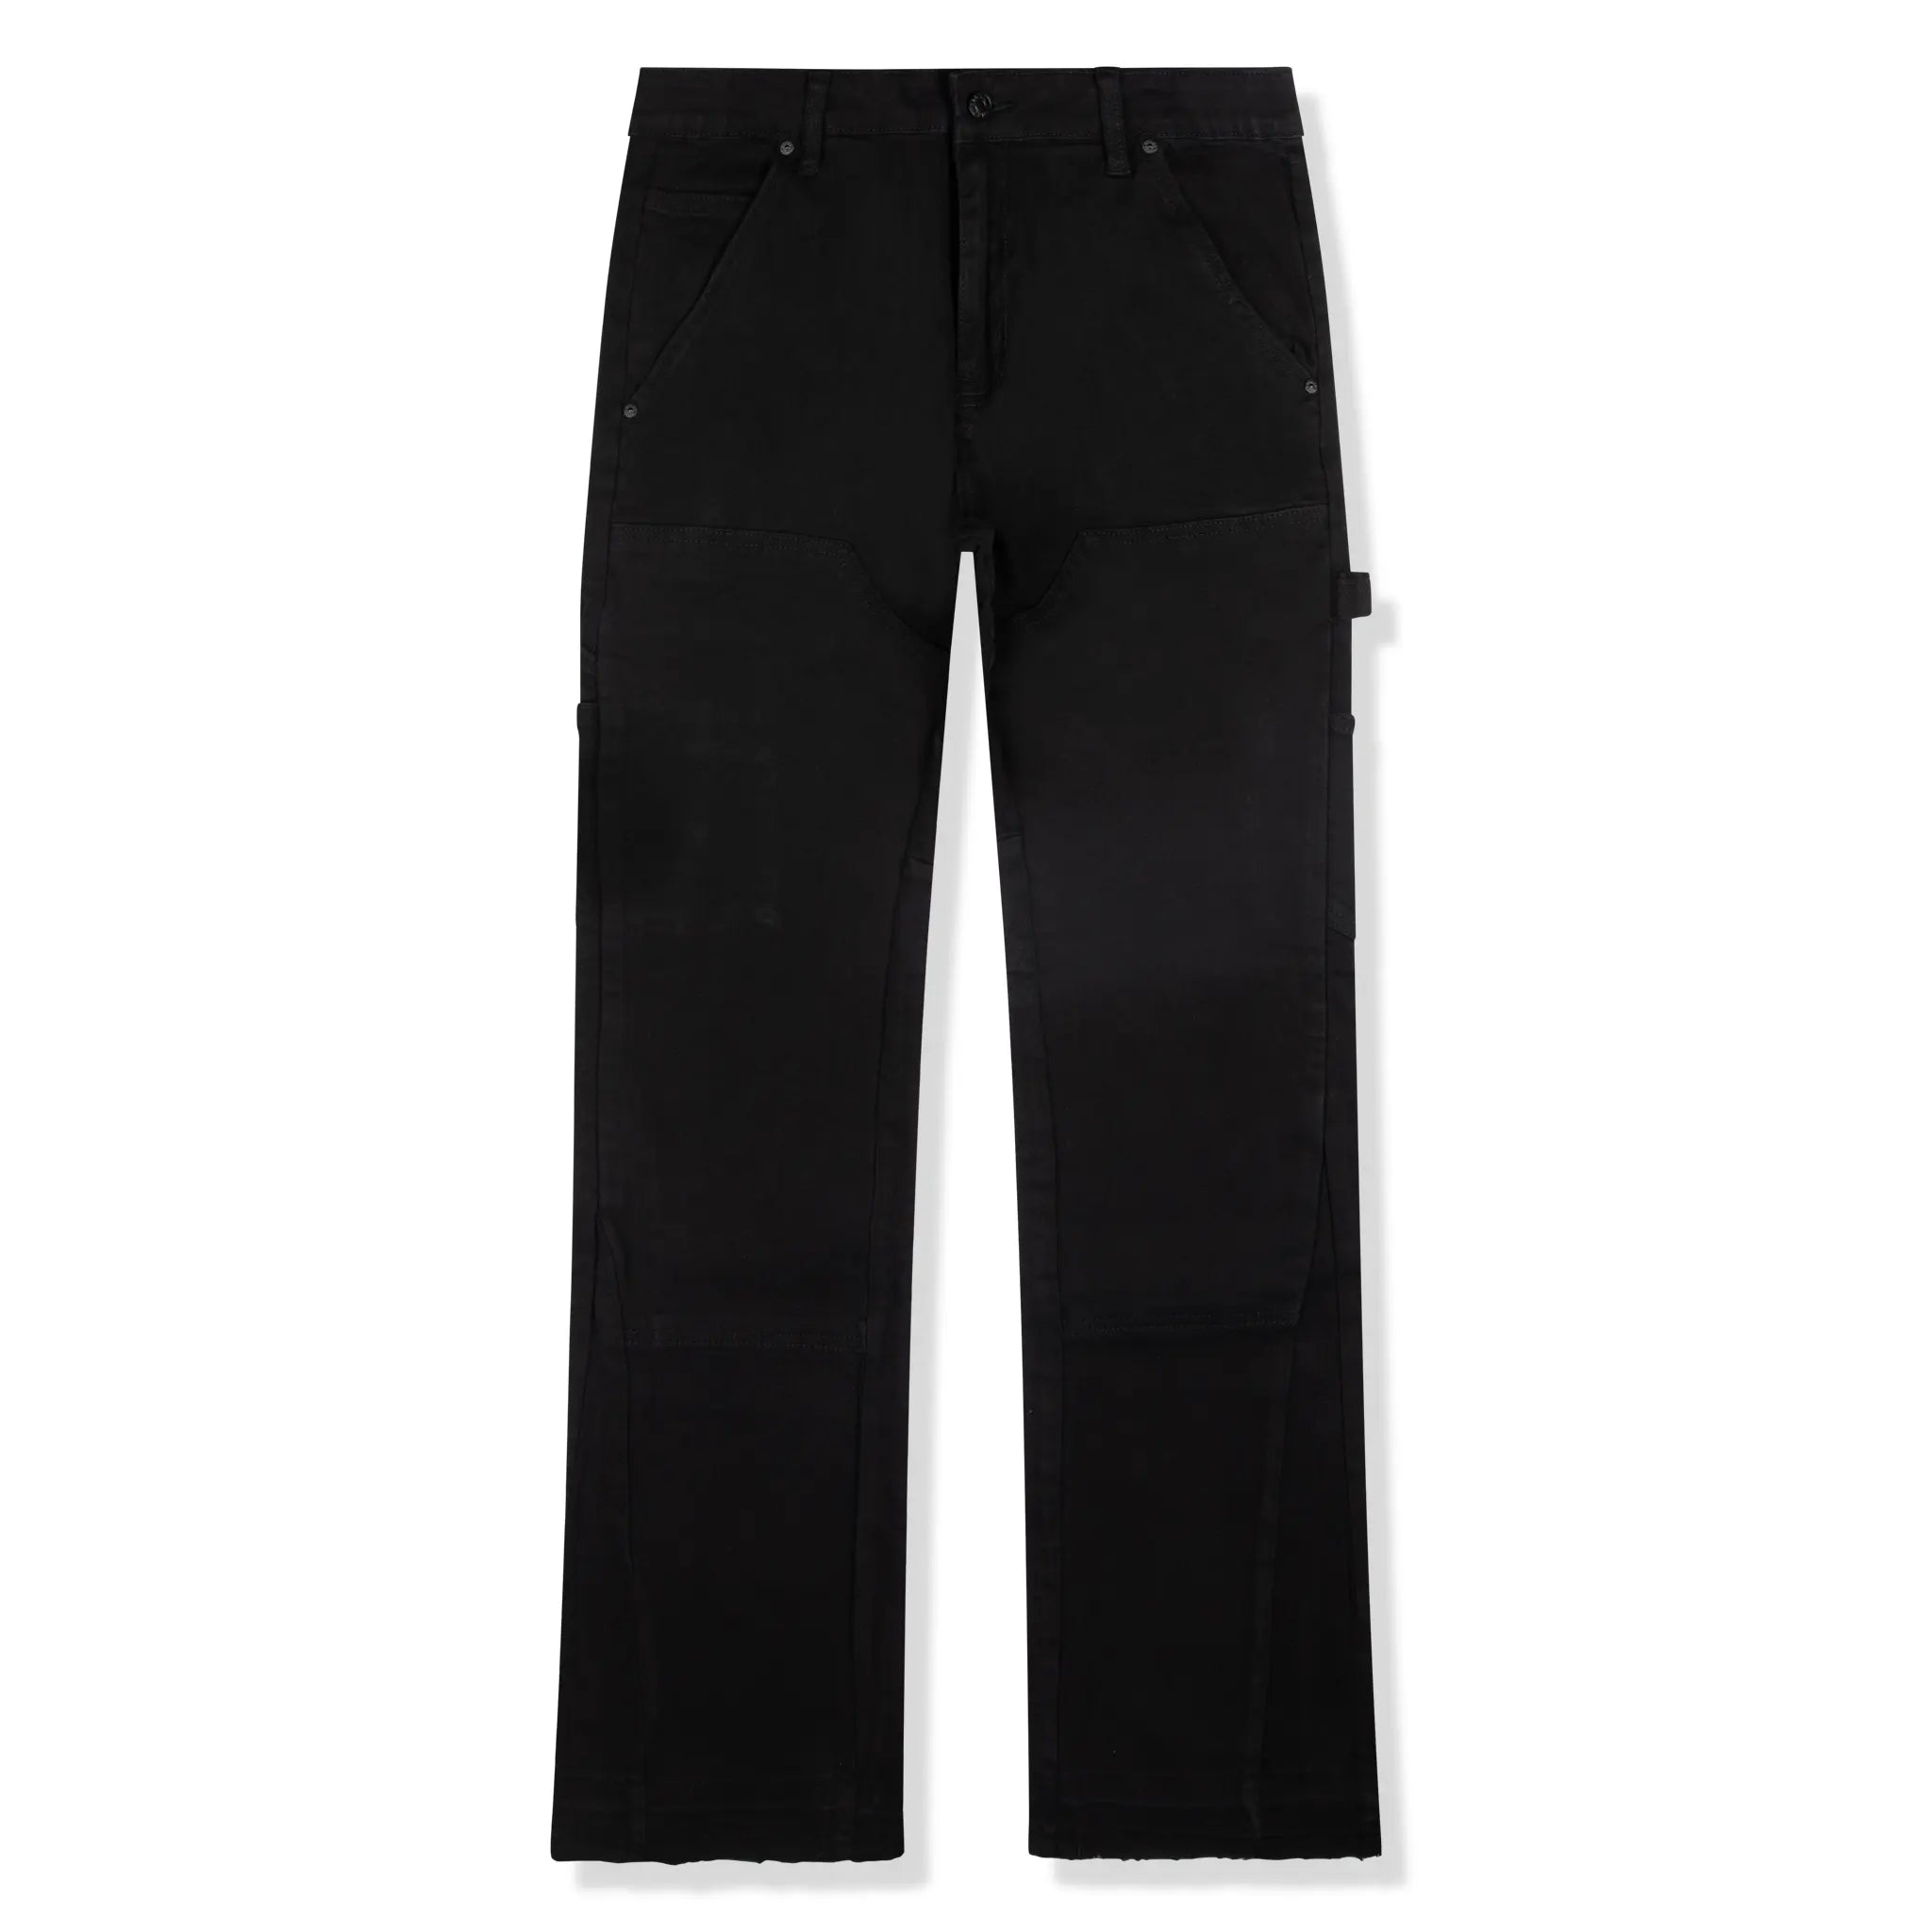 Front view of SIARR Rio Jeans Black